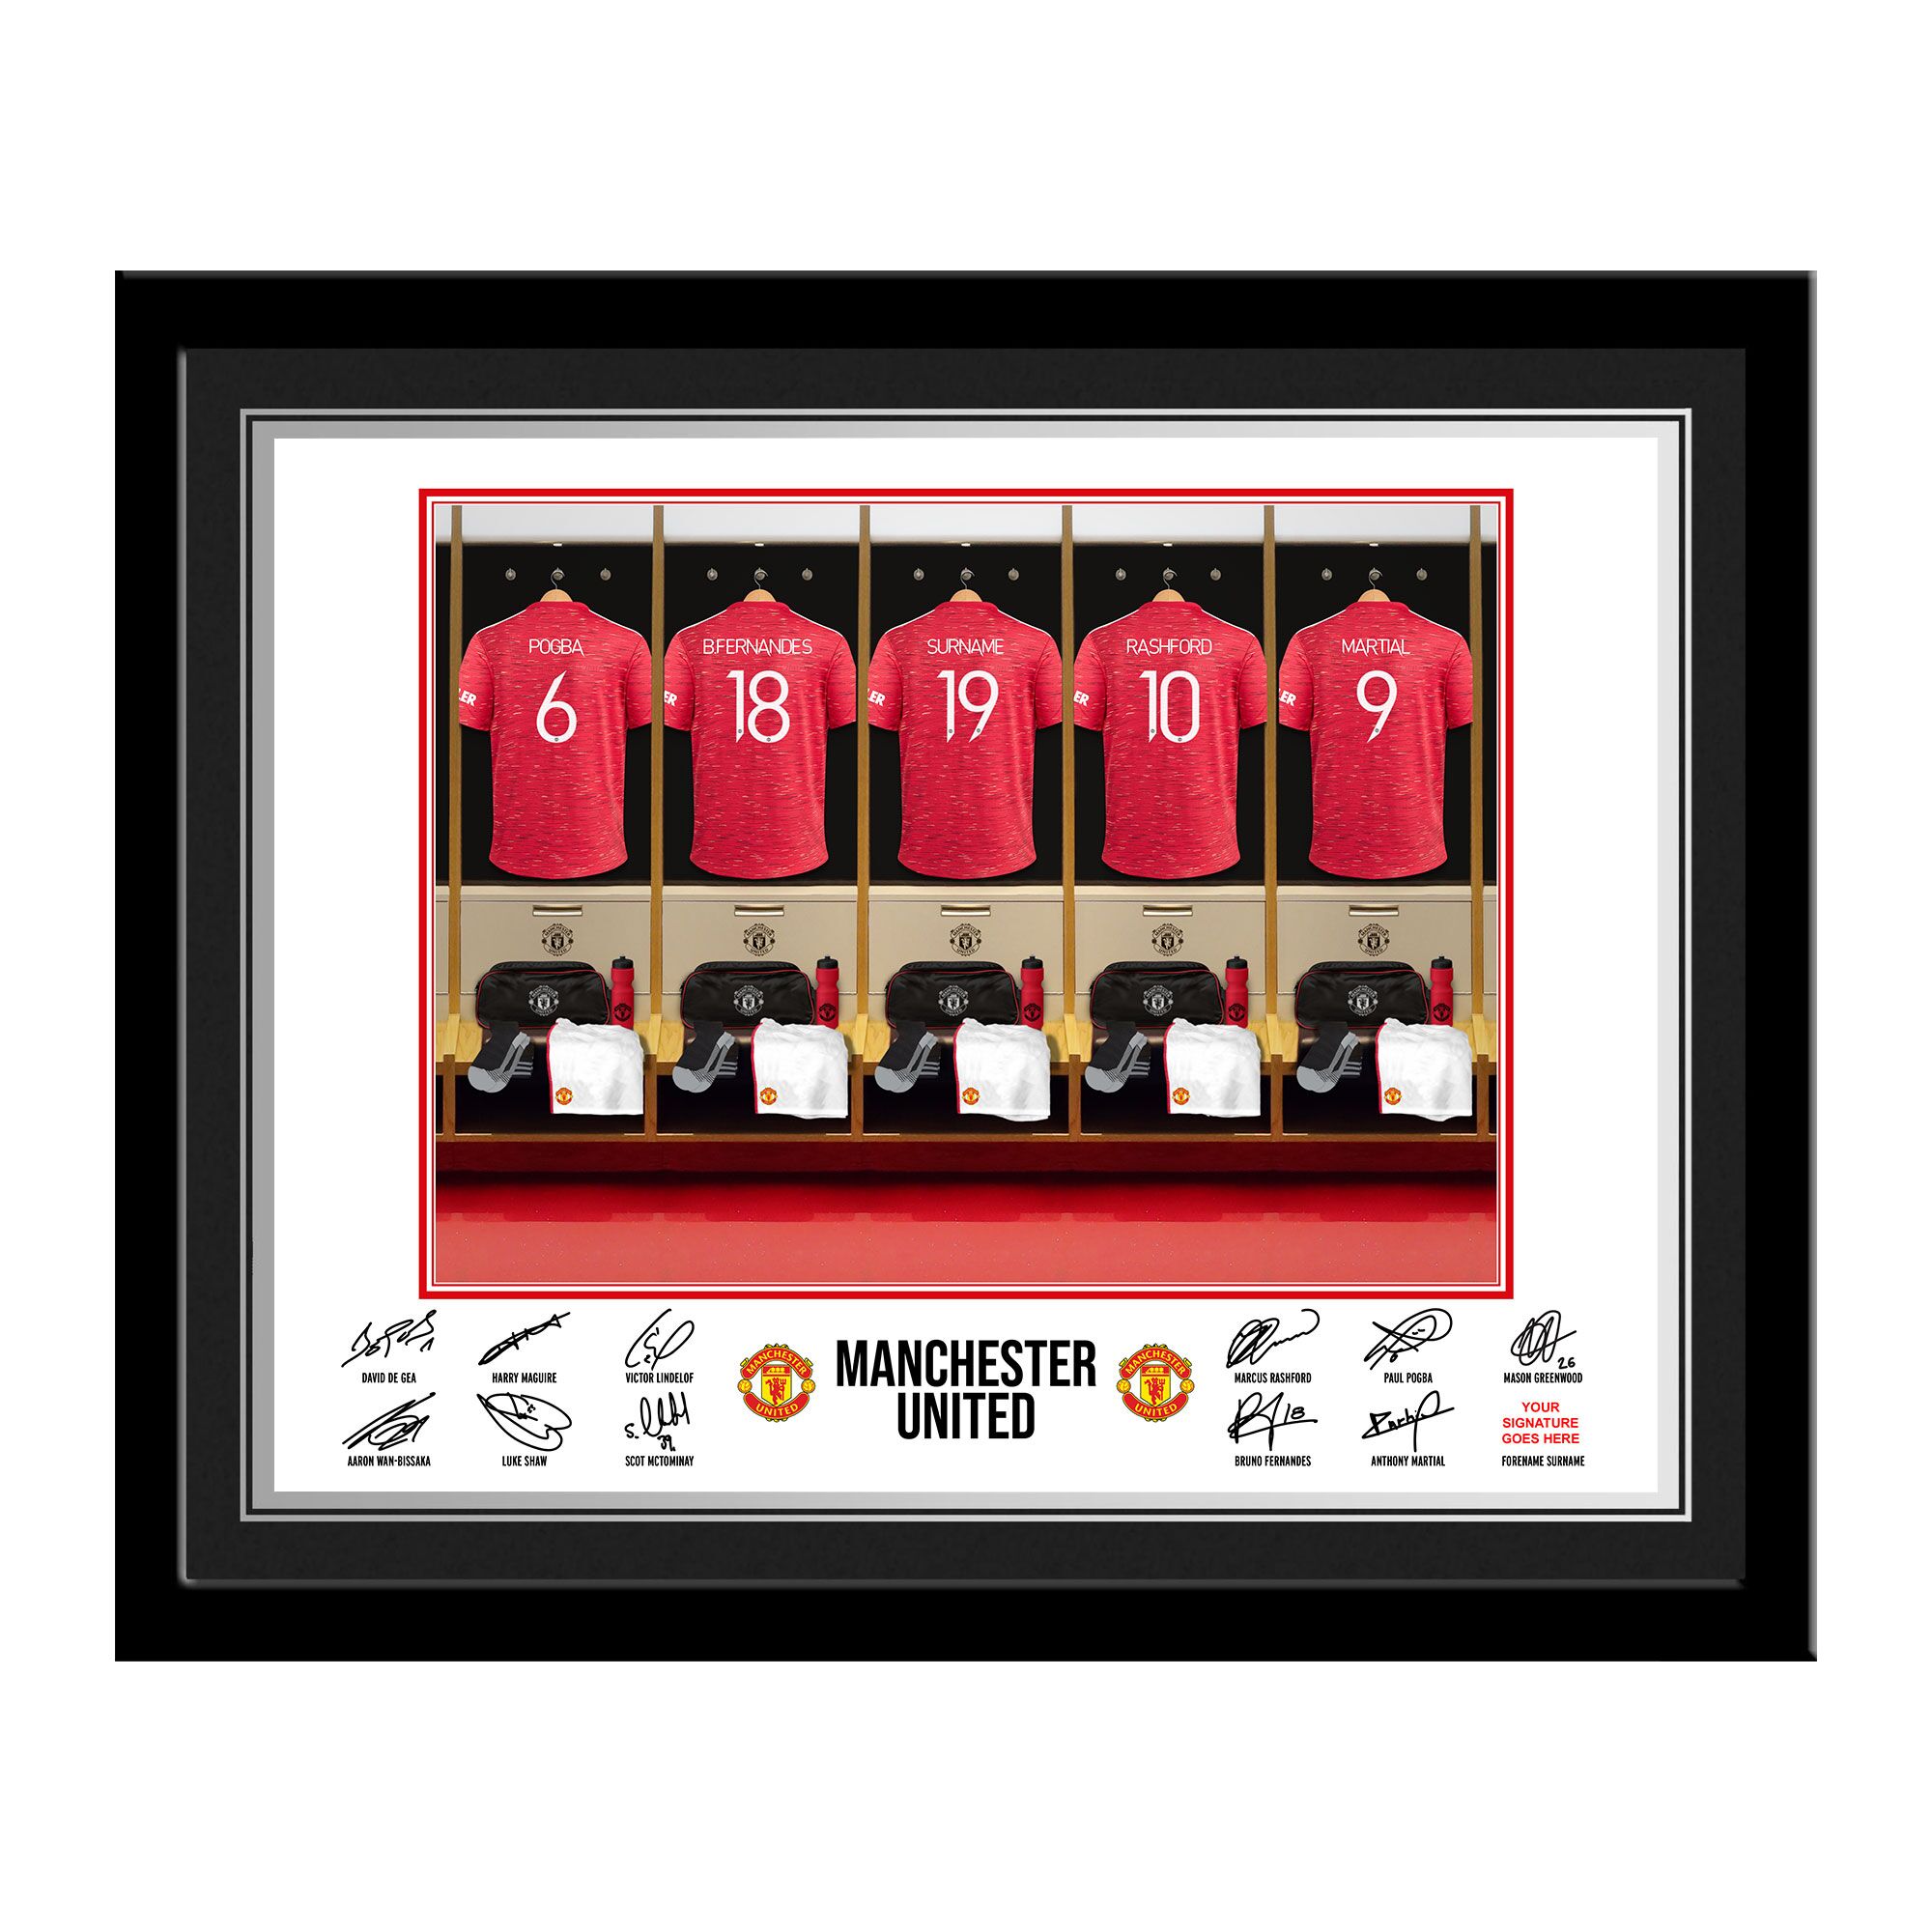 Personalised Manchester United FC Dressing Room Photo Framed